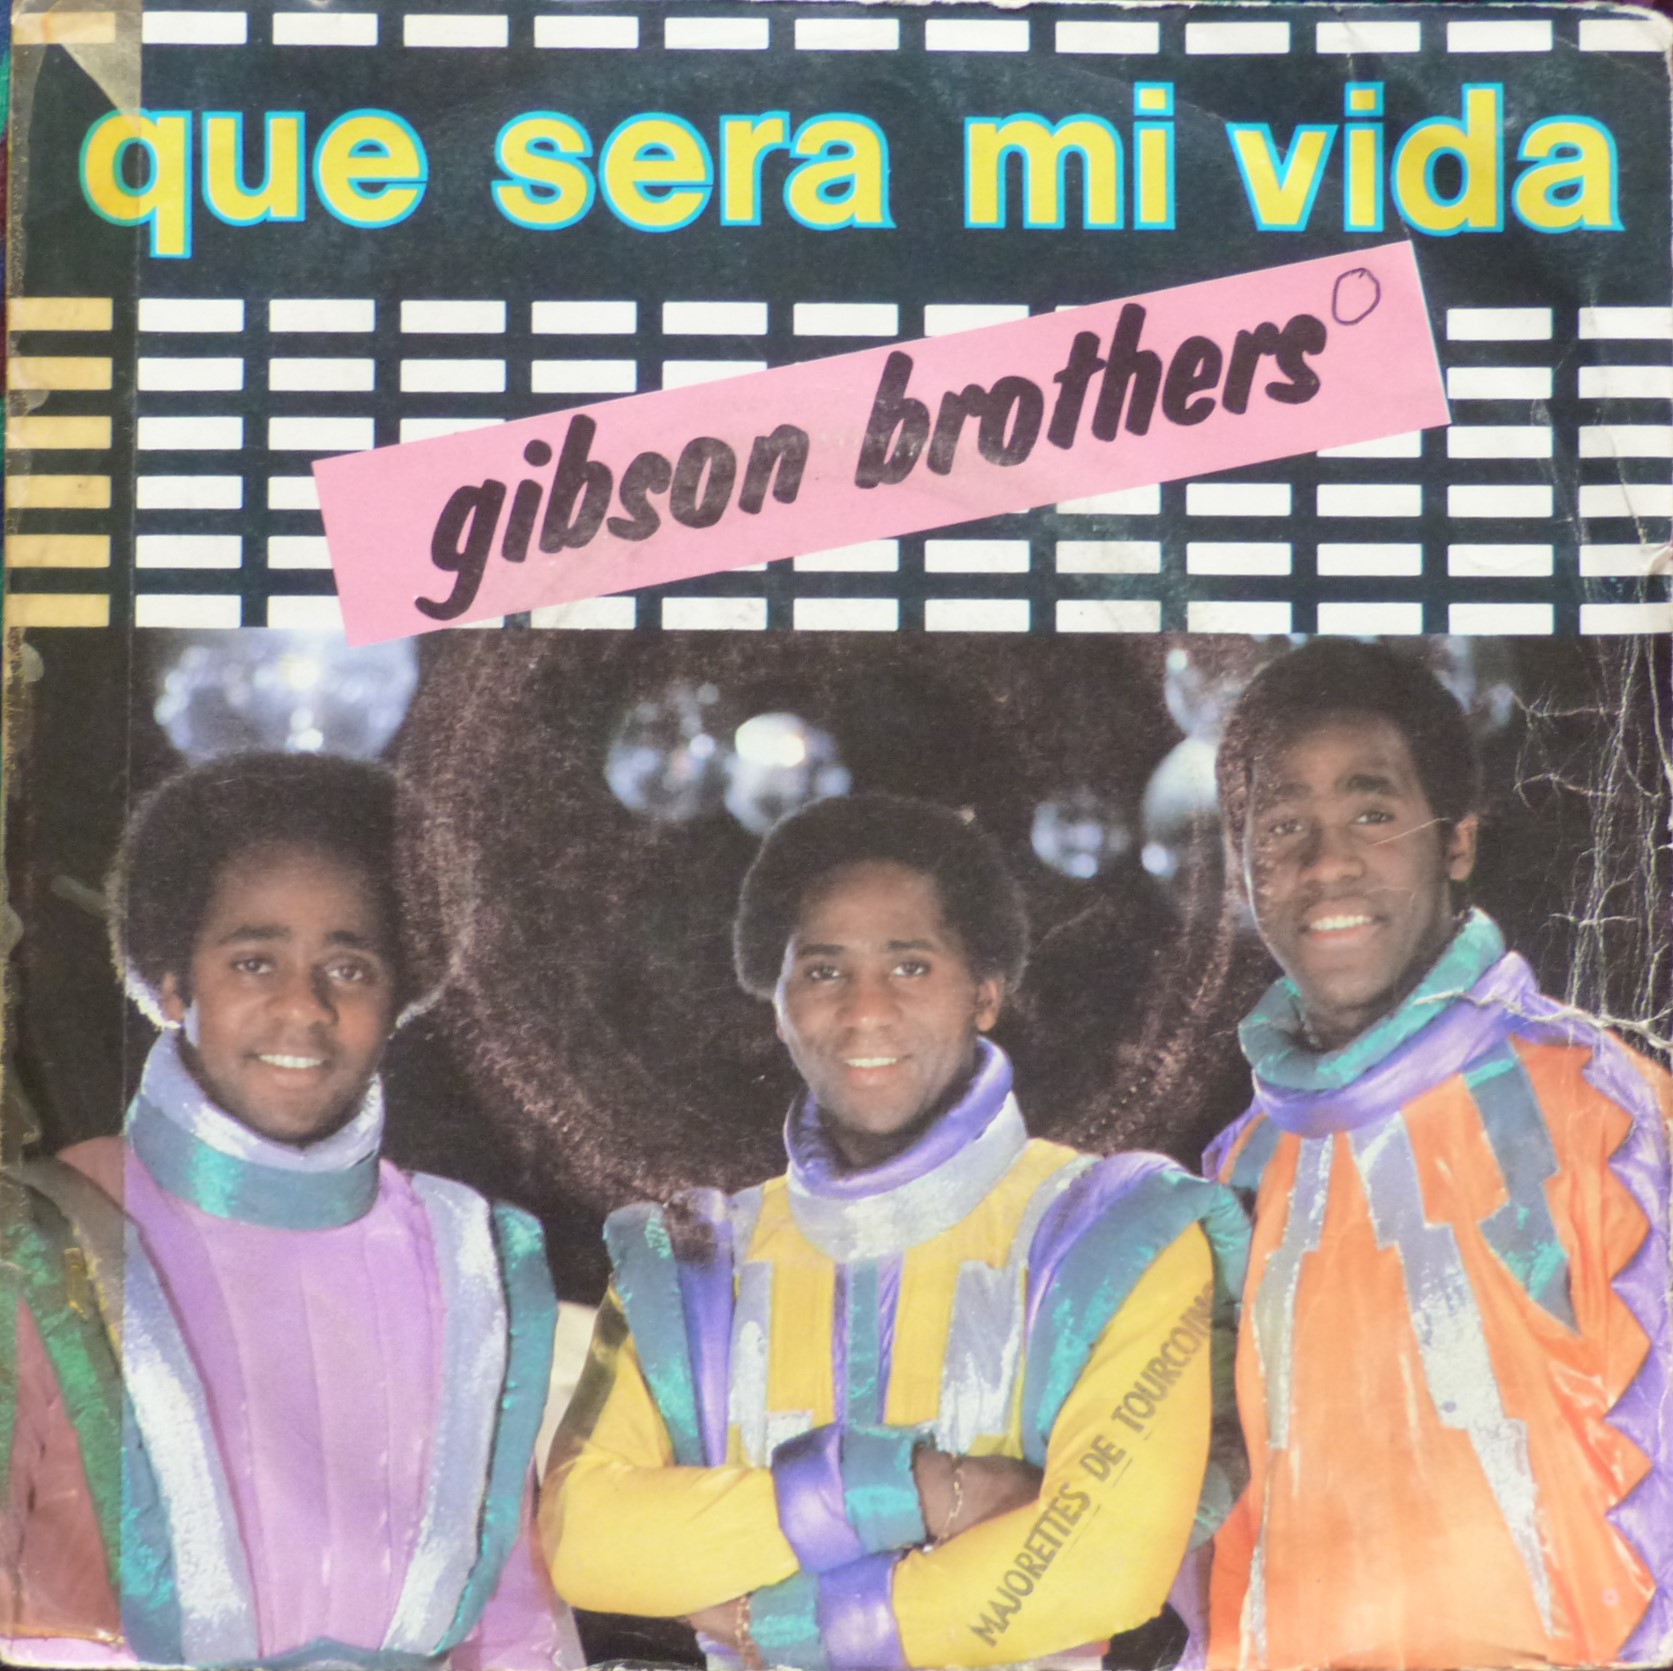 Gibson brothers